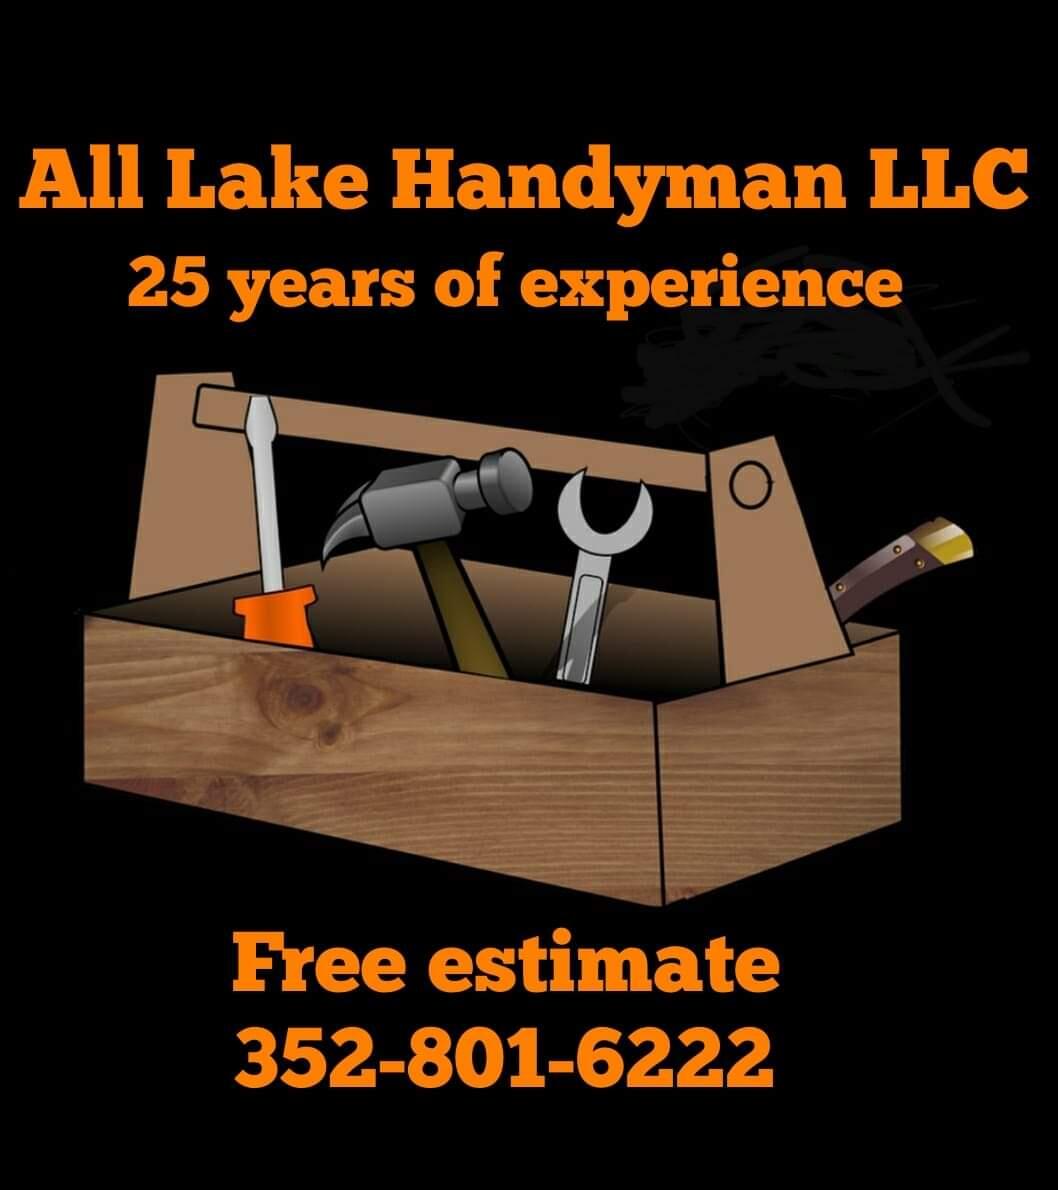 The 10 Best Handyman Services in Eustis, FL (with Free Estimates)